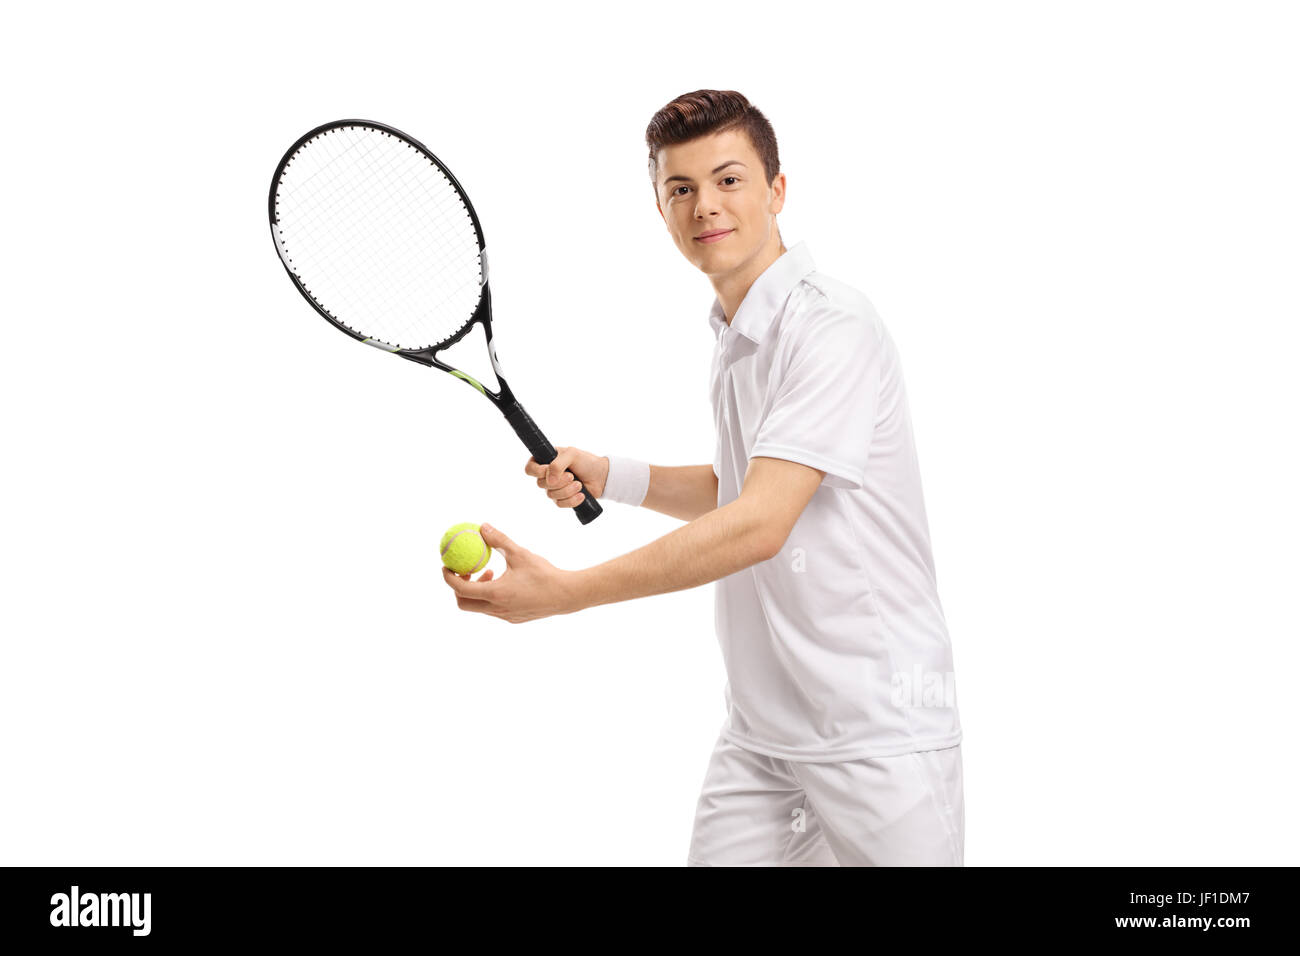 Teenage tennis player preparing to serve isolated on white background Stock Photo